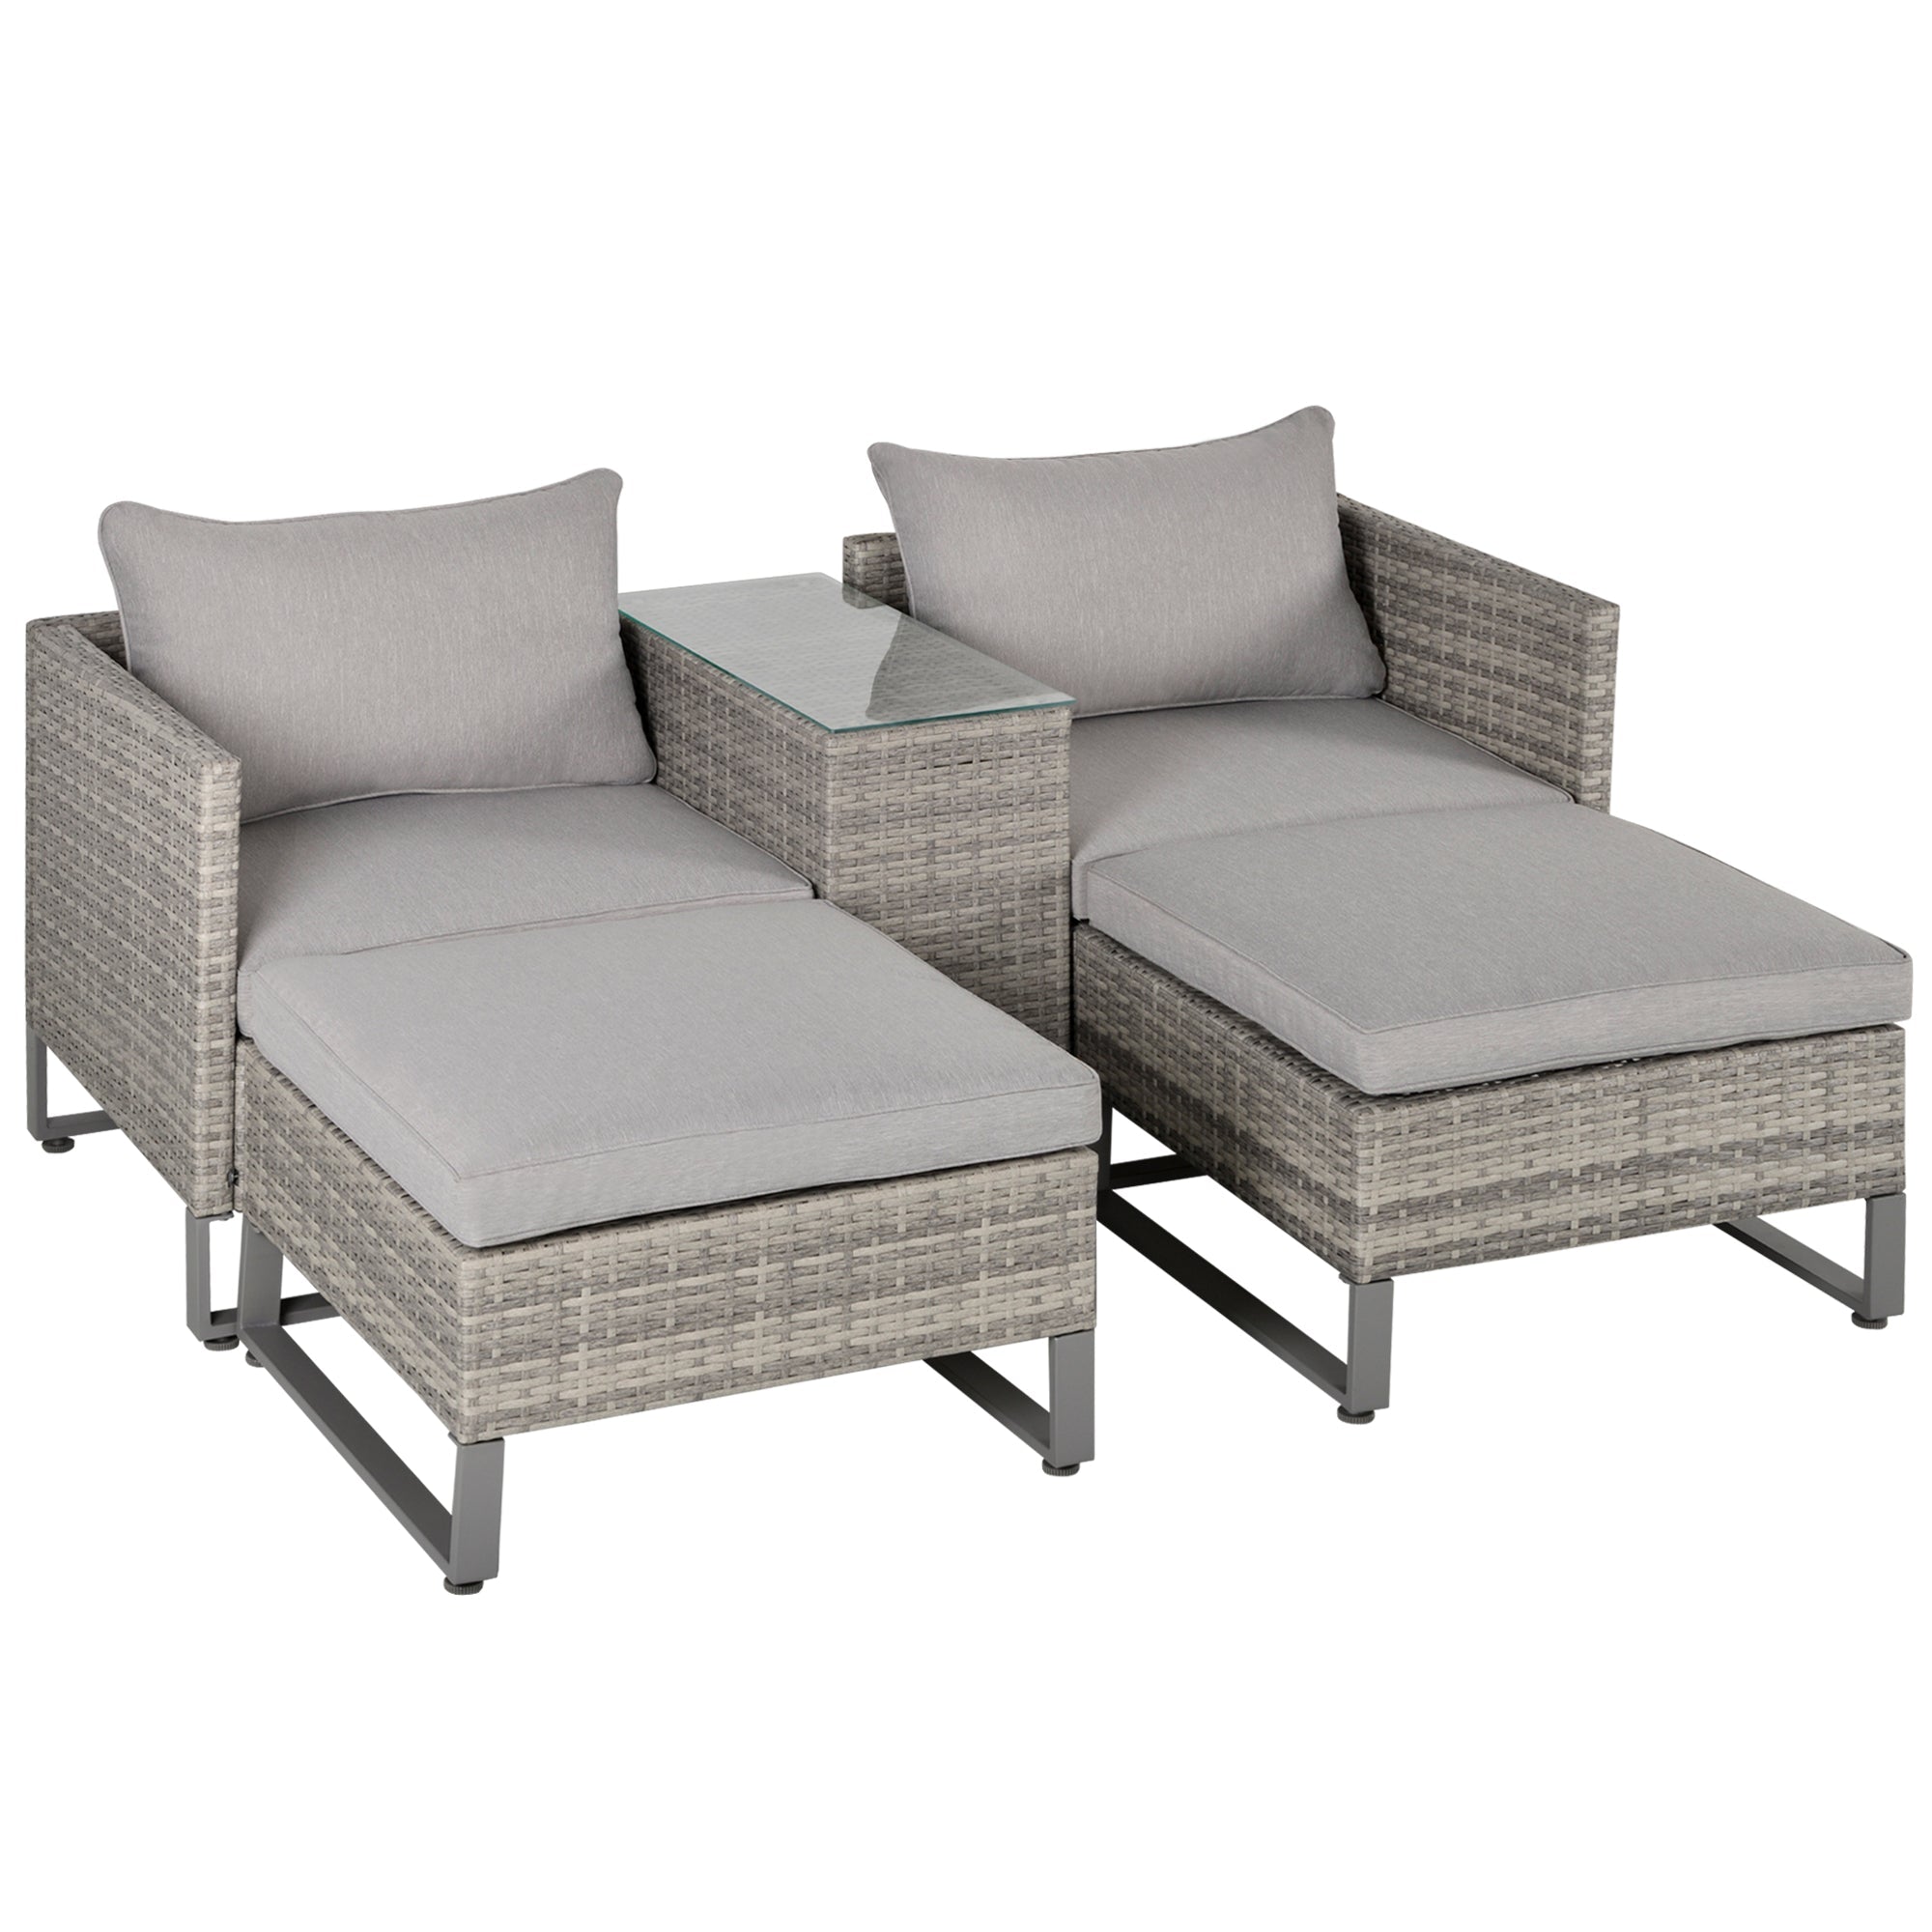 2 Seater Patio Rattan Wicker Sofa Set Chaise Lounge Double Sofa Bed Furniture w/ Coffee Table & Footstool for Patios, Garden, Backyard, Grey-0